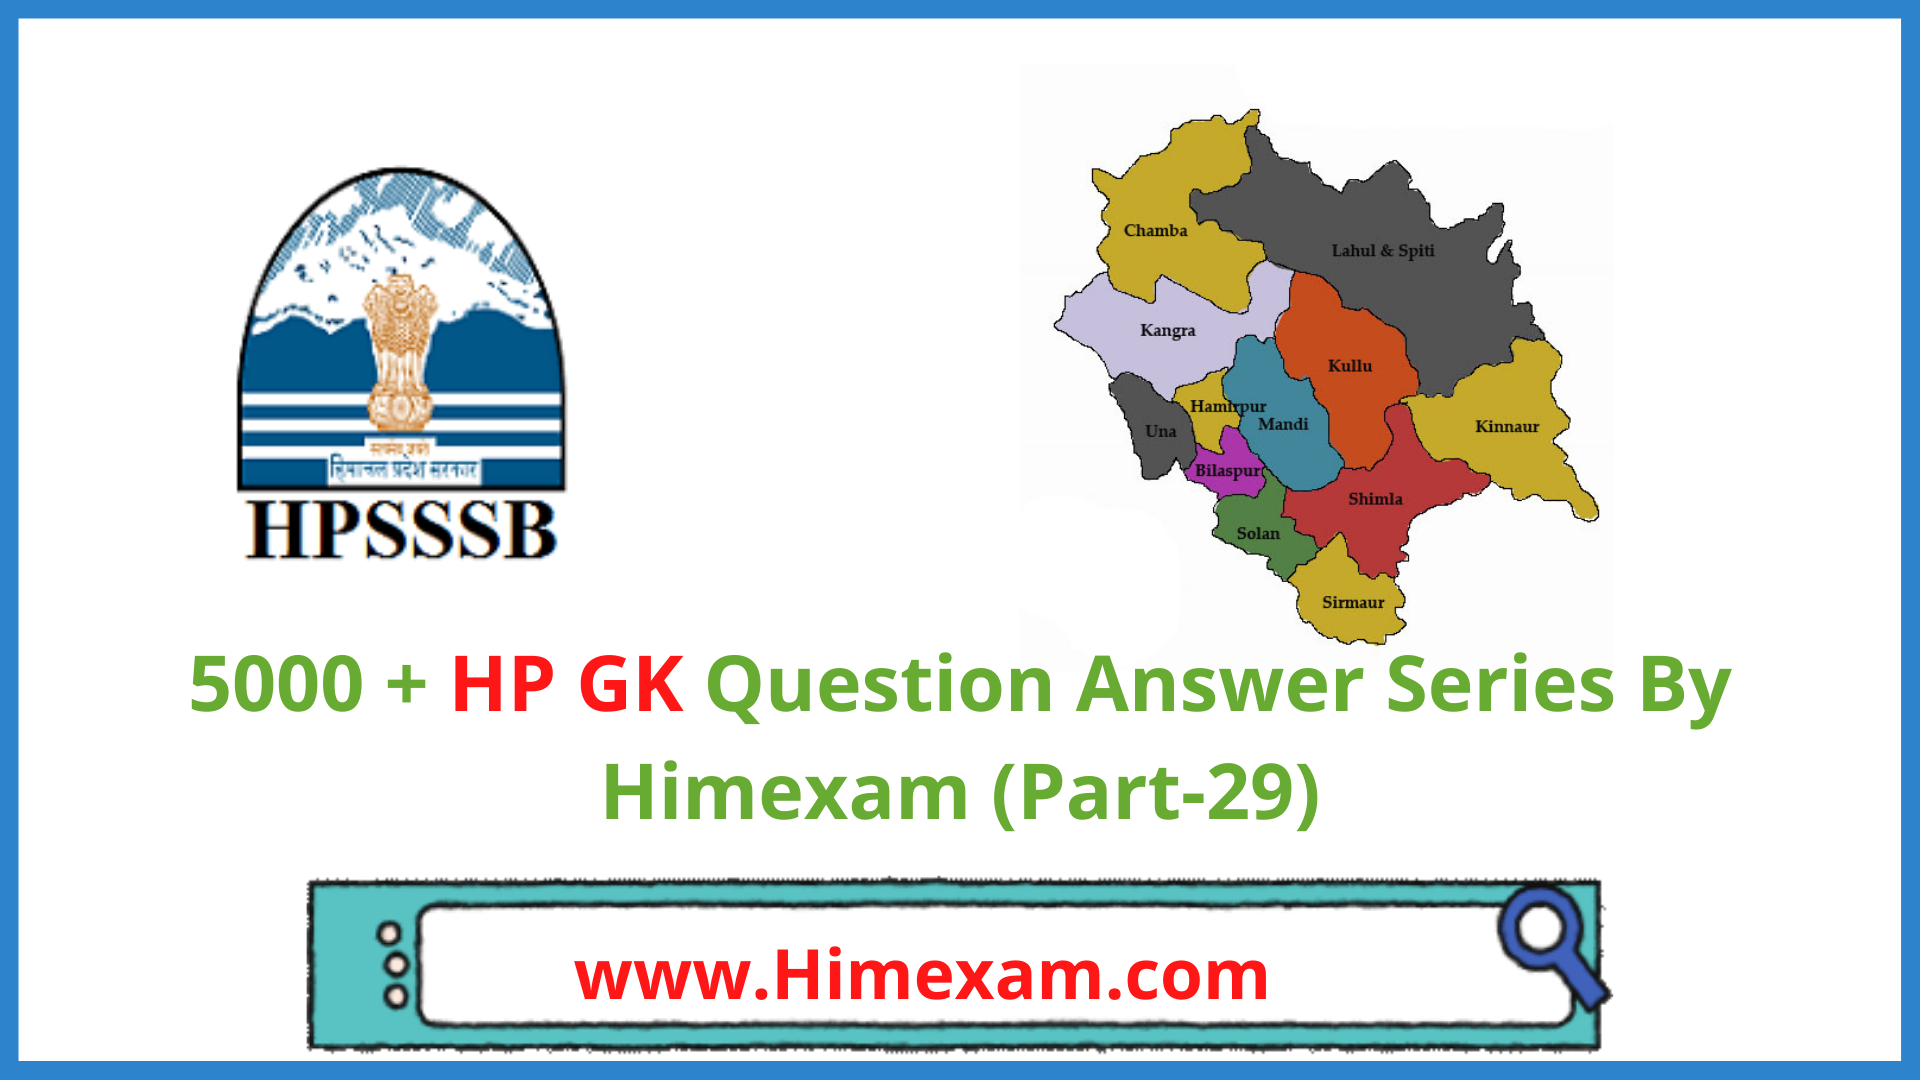 5000 + HP GK Question Answer Series By Himexam (Part-29)